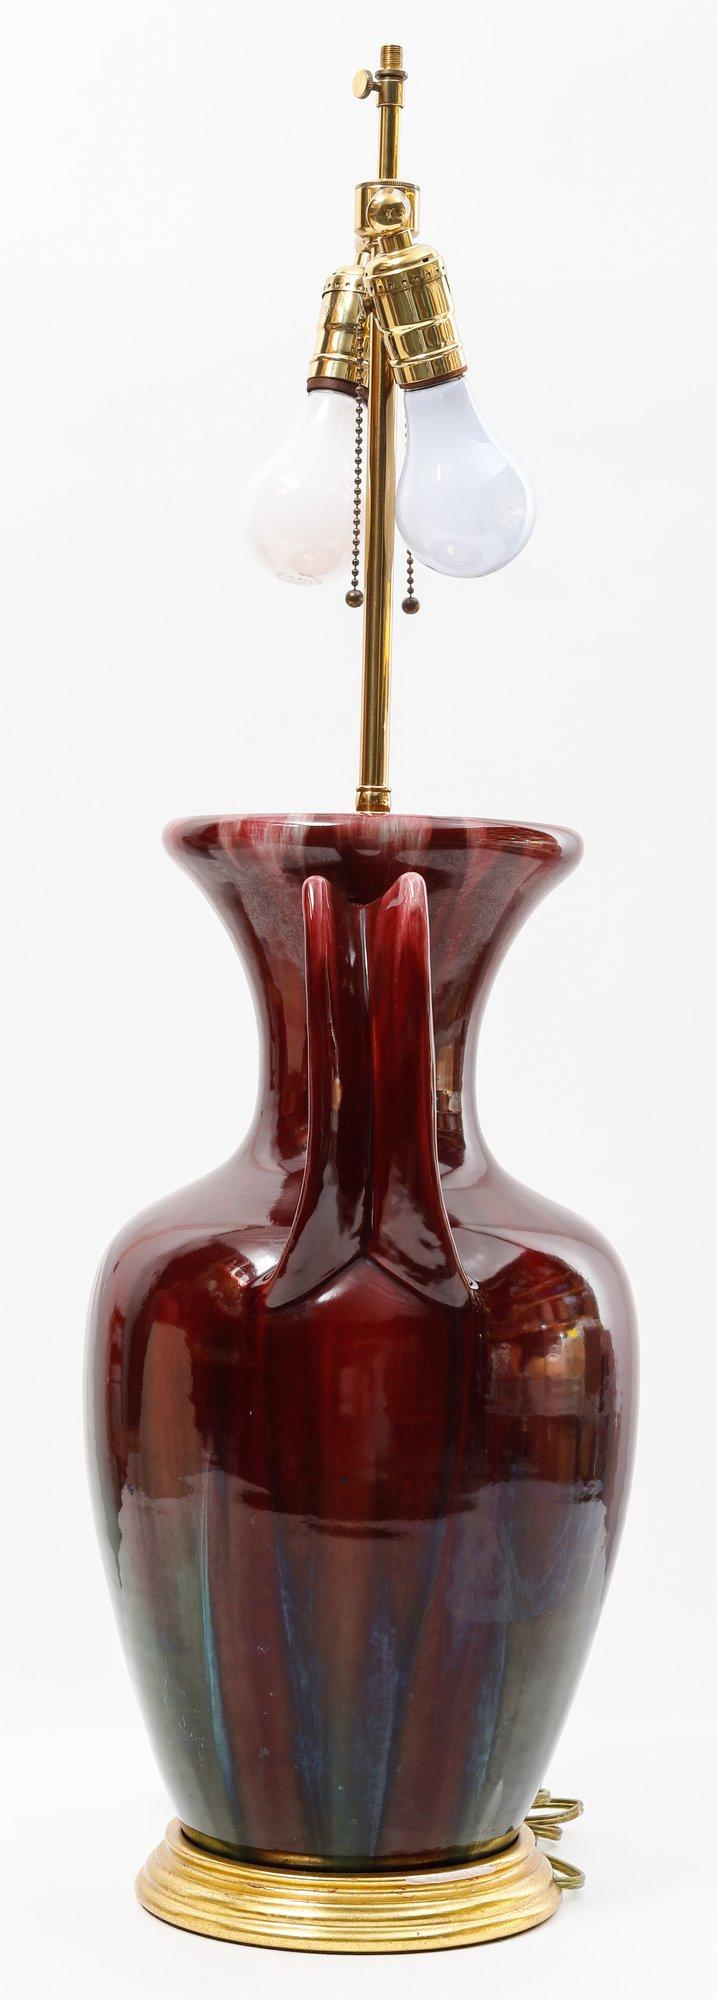 Oxblood Flambe Porcelain Lamps With Acorn Finials